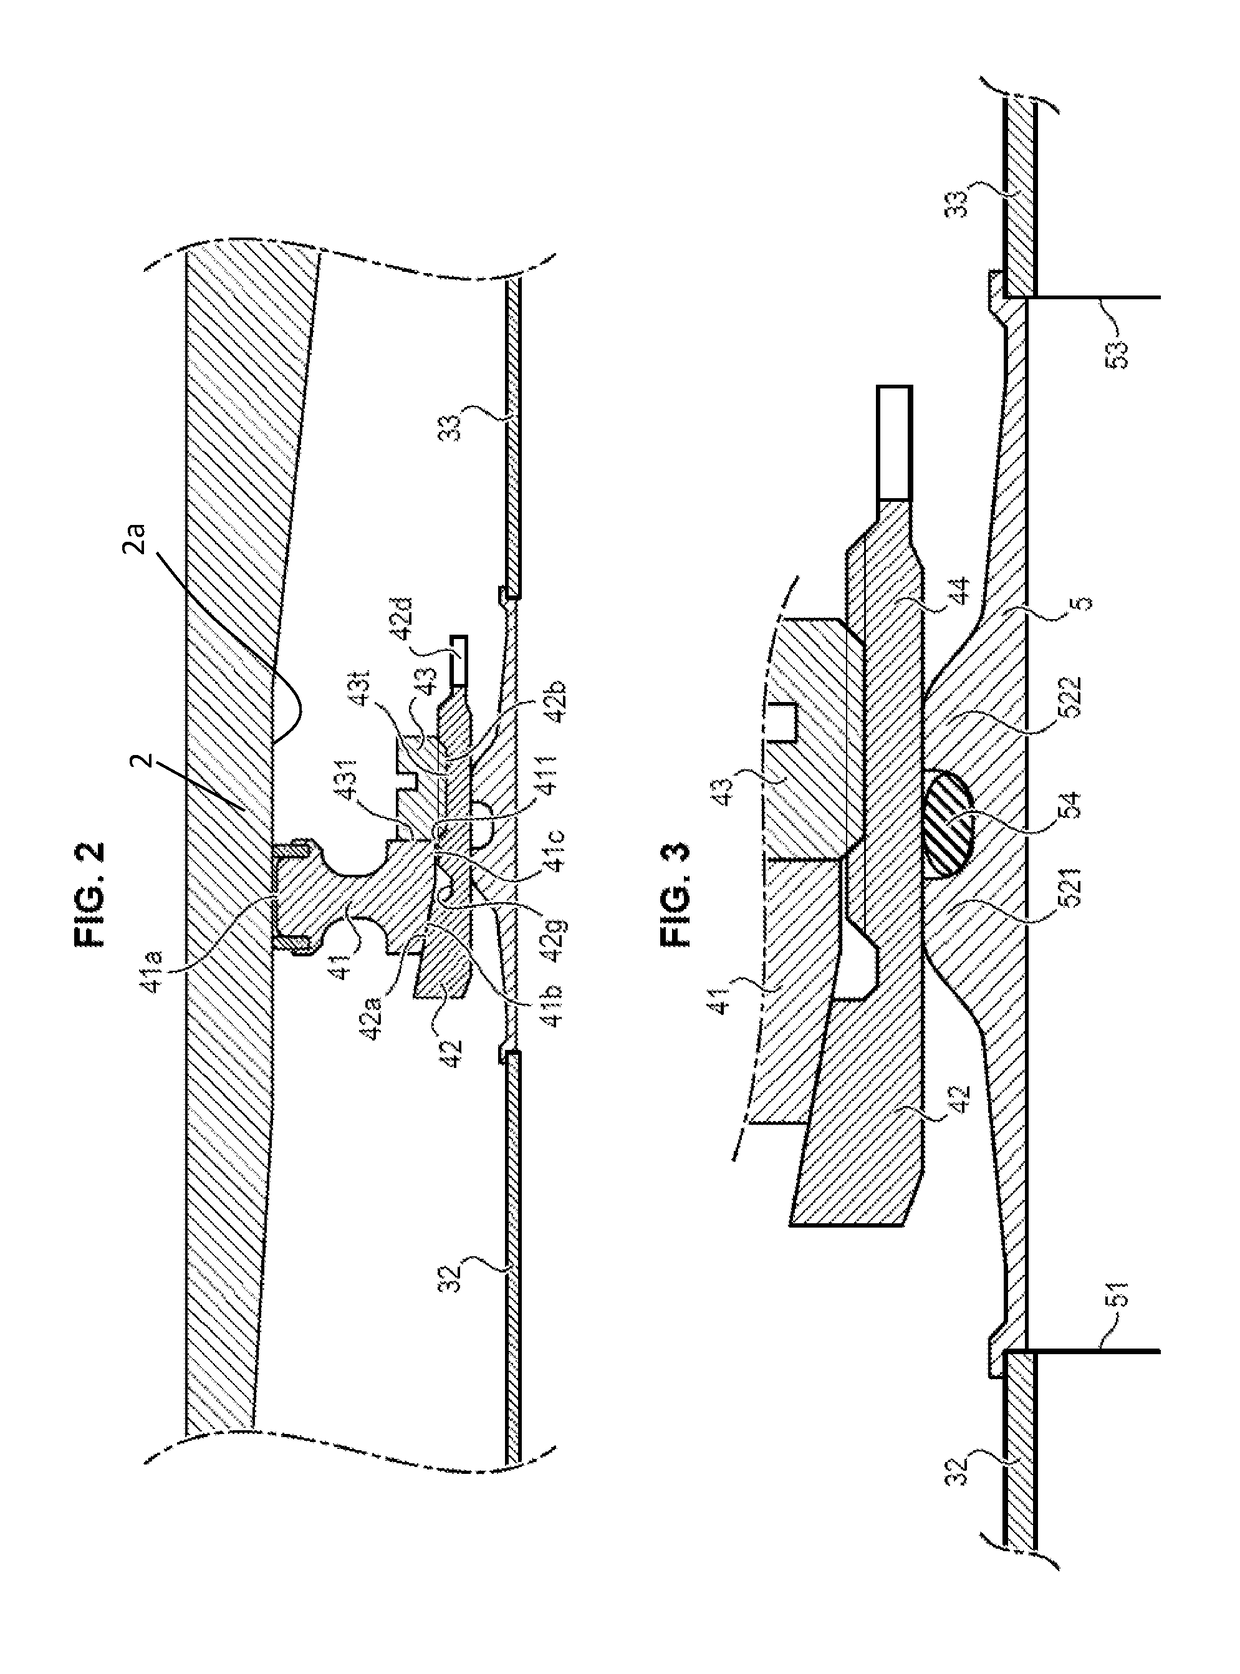 Support providing a complete connection between a turbine shaft and a degassing pipe of a turbojet